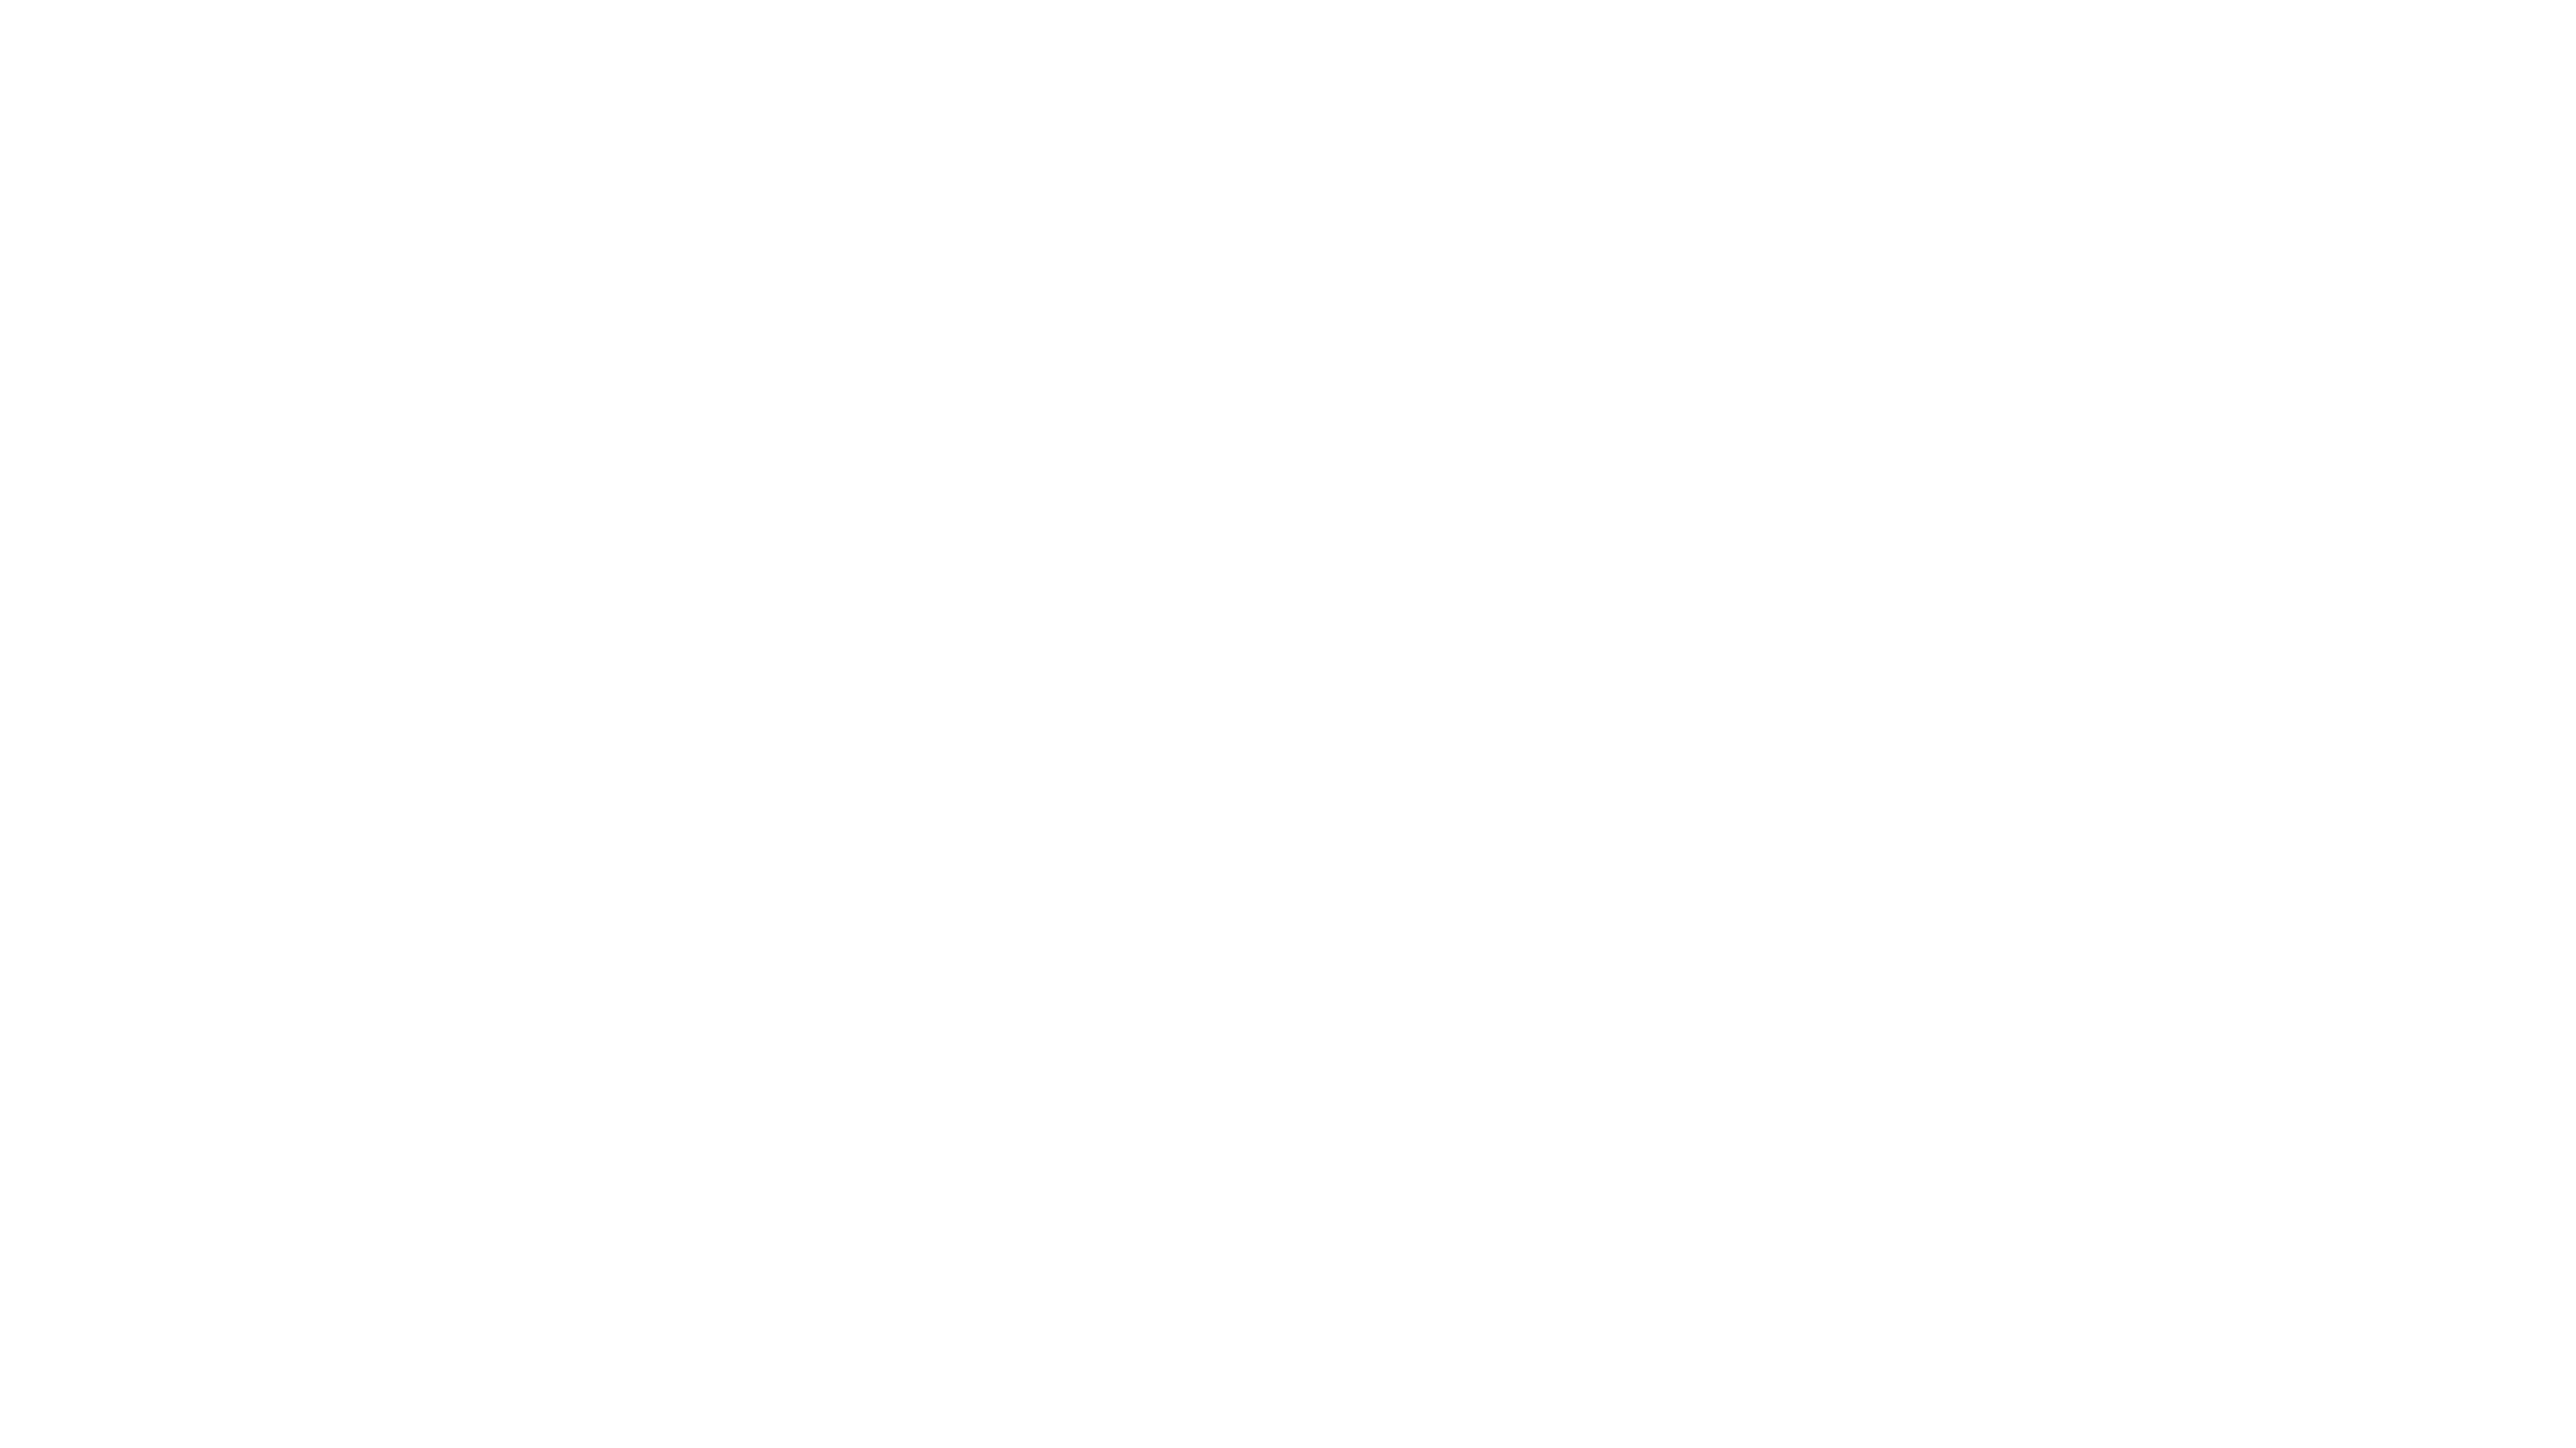 Americas Cup sports events